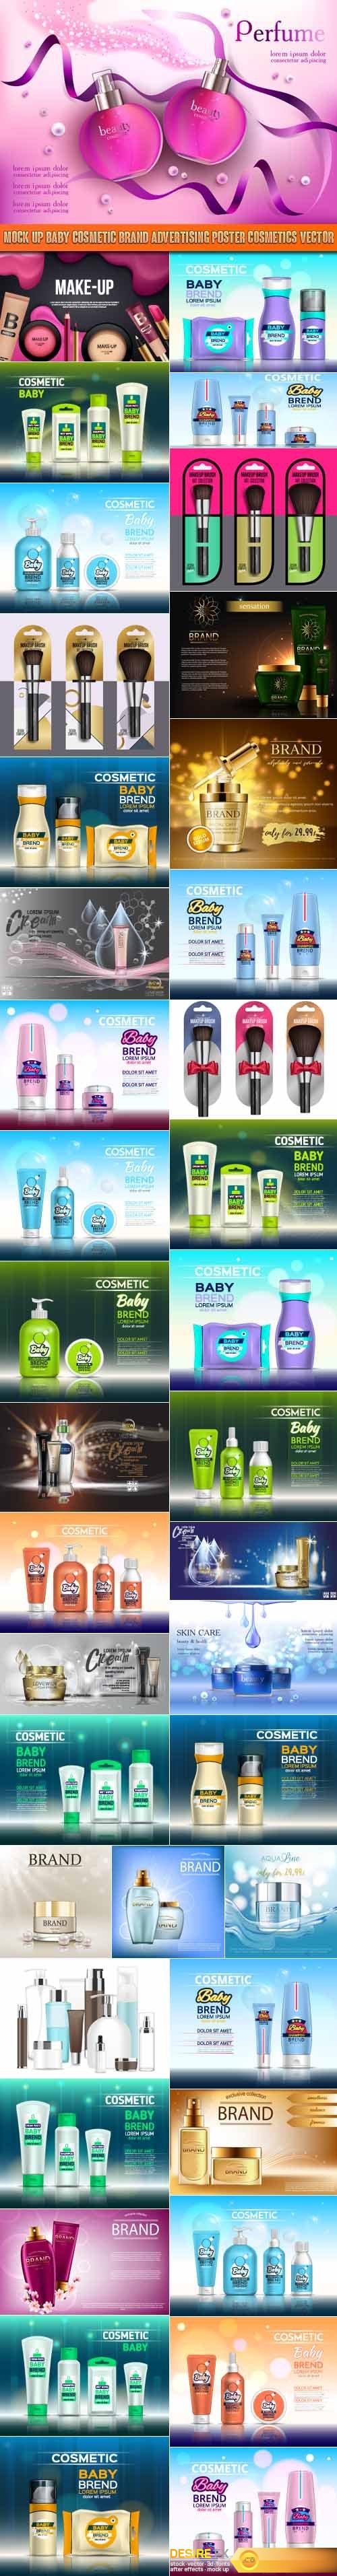 1487476988_mock-up-baby-cosmetic-brand-advertising-poster-cosmetics-vector